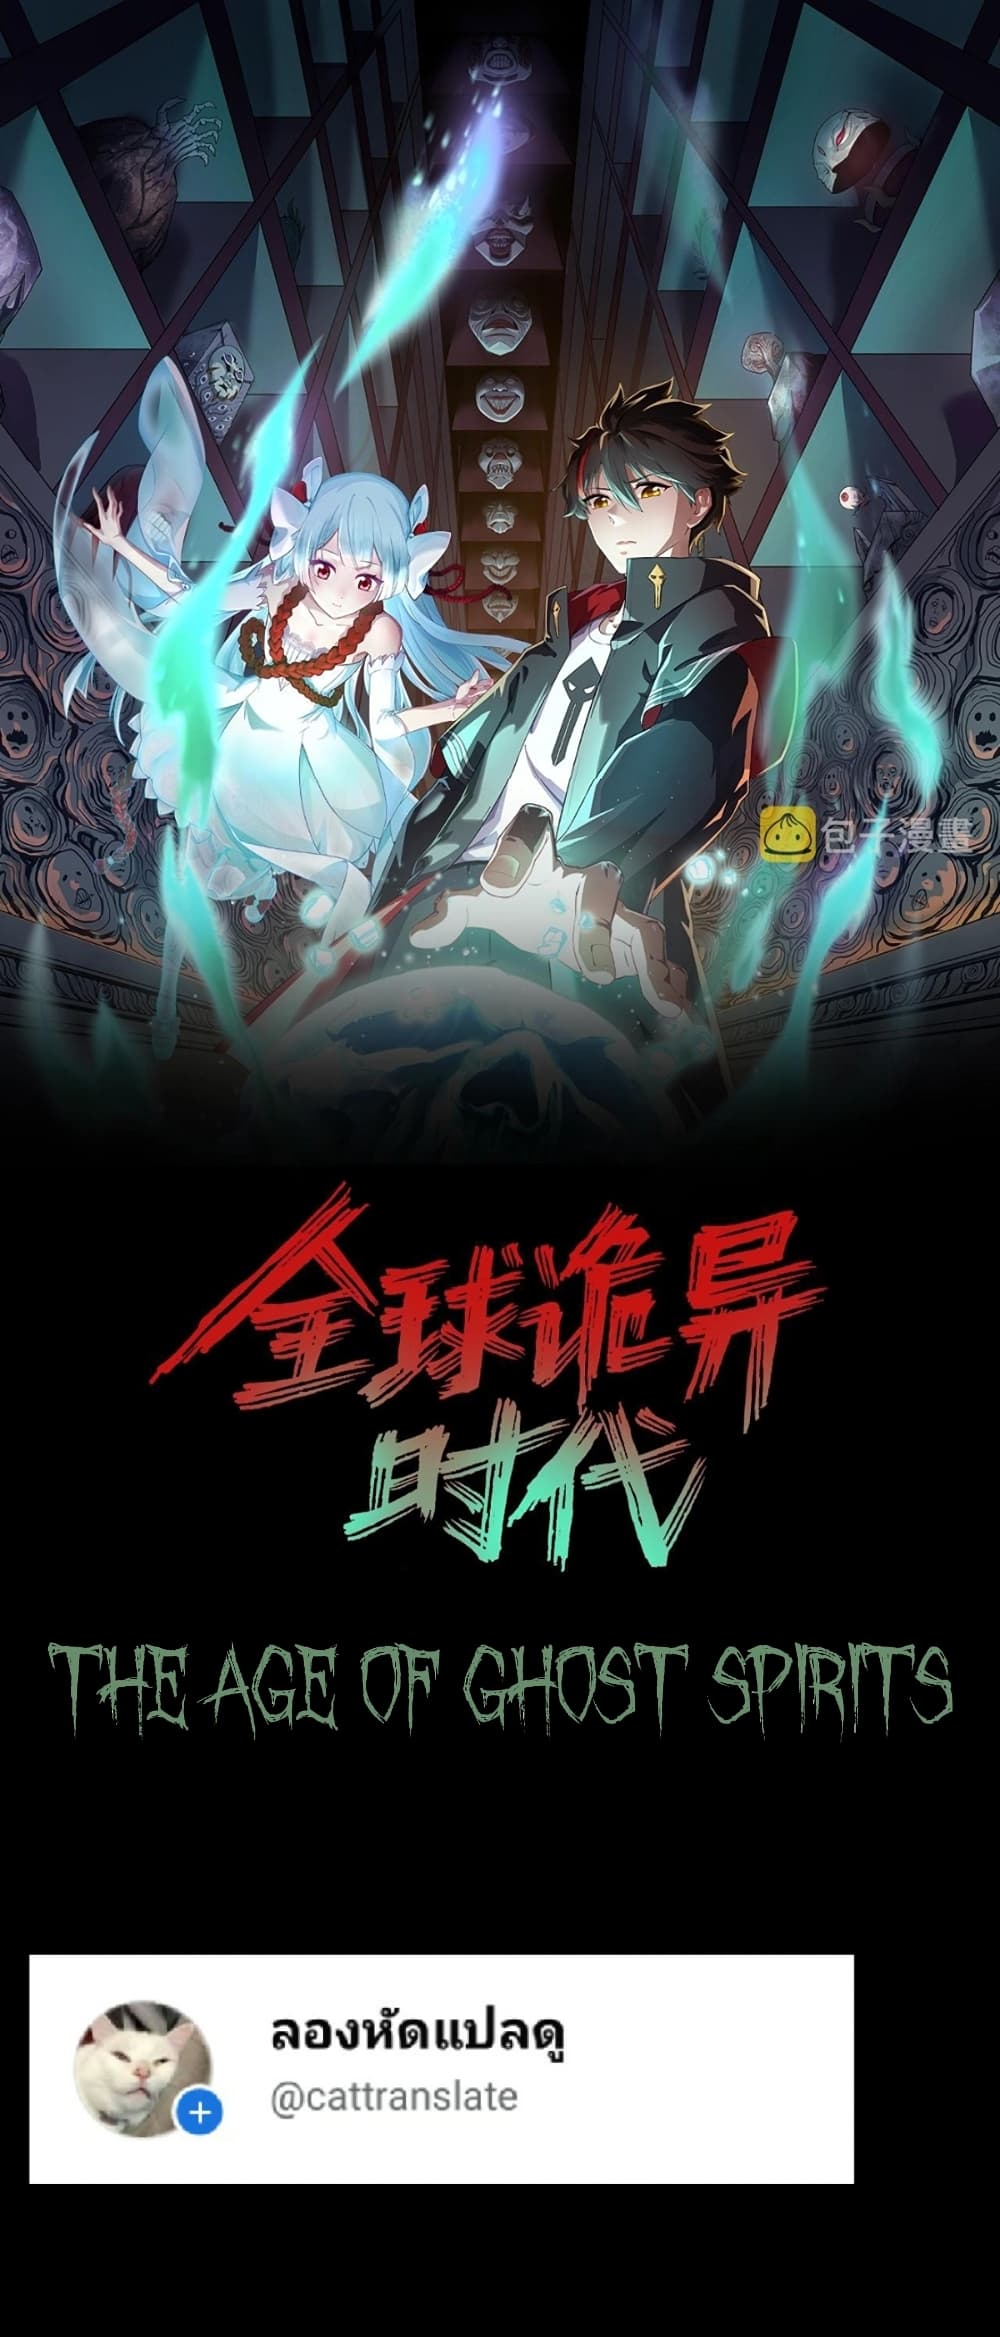 The Age of Ghost Spirits à¸à¸­à¸à¸à¸µà¹ 9 (1)